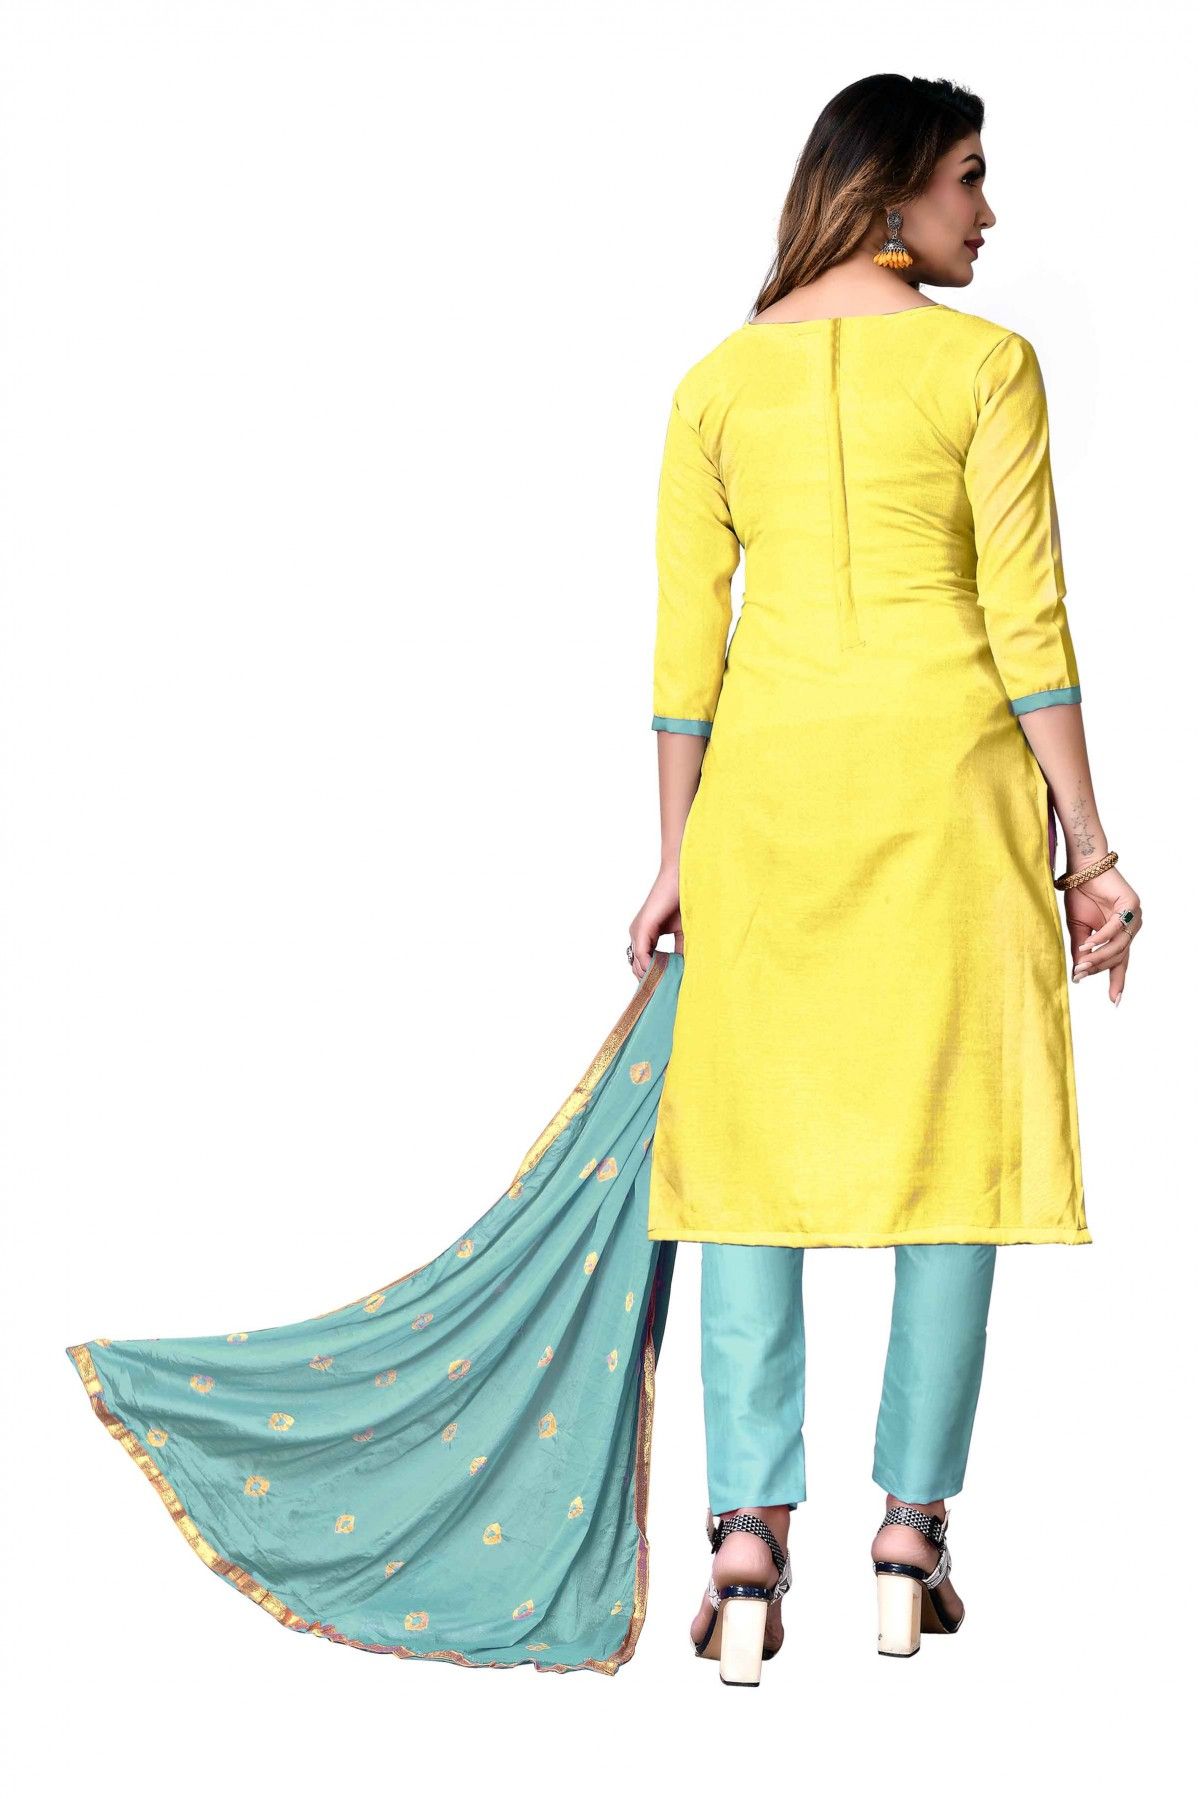 Unstitched Modal Cotton Embroidery Churidar Suit In Yellow Colour